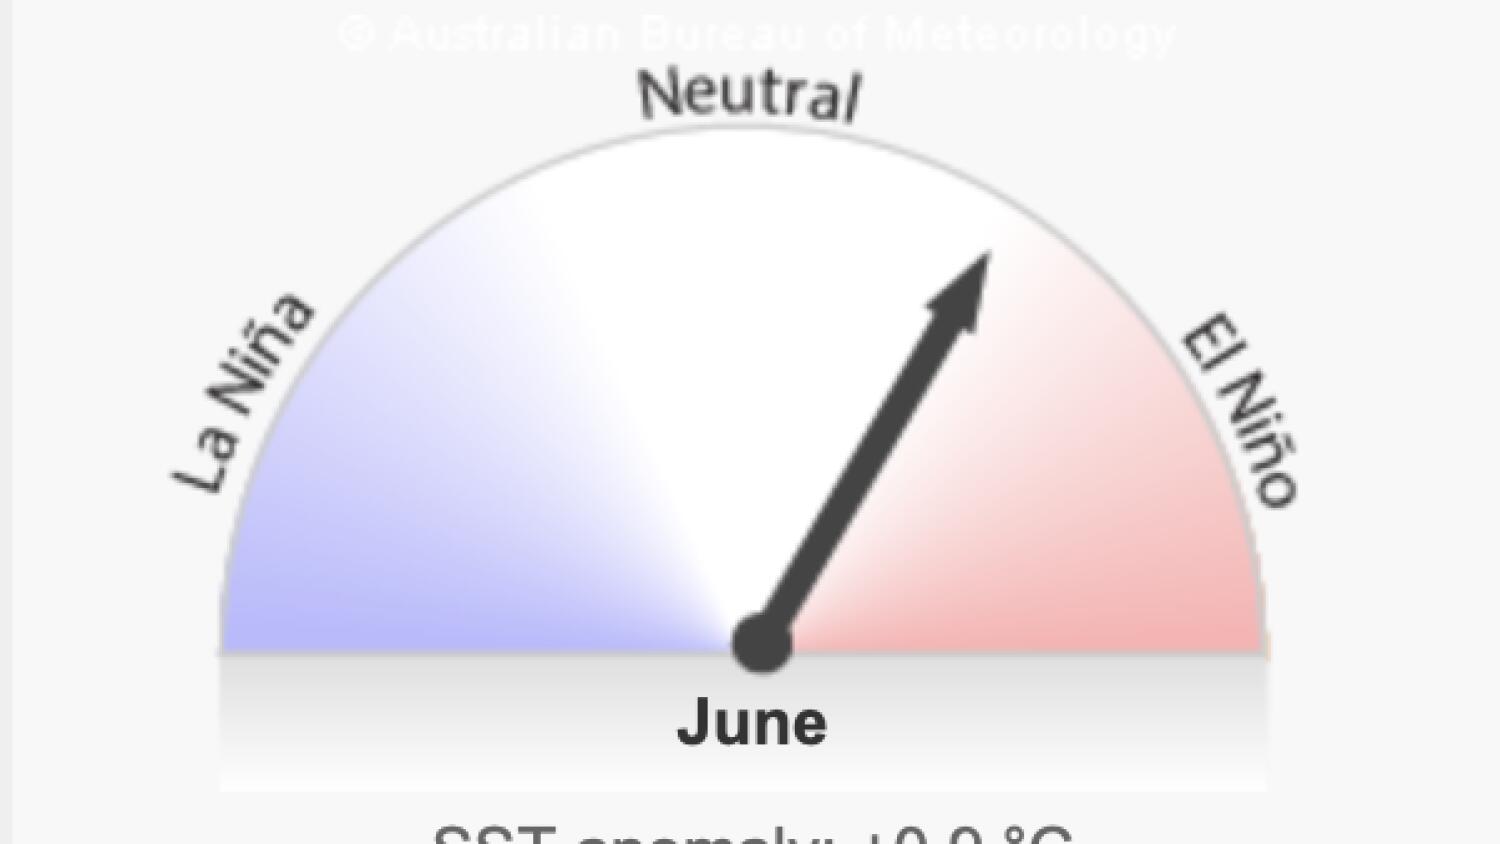 The El Niño forecaster is currently set at 'watch', meaning that El Niño is a possibility later this year.